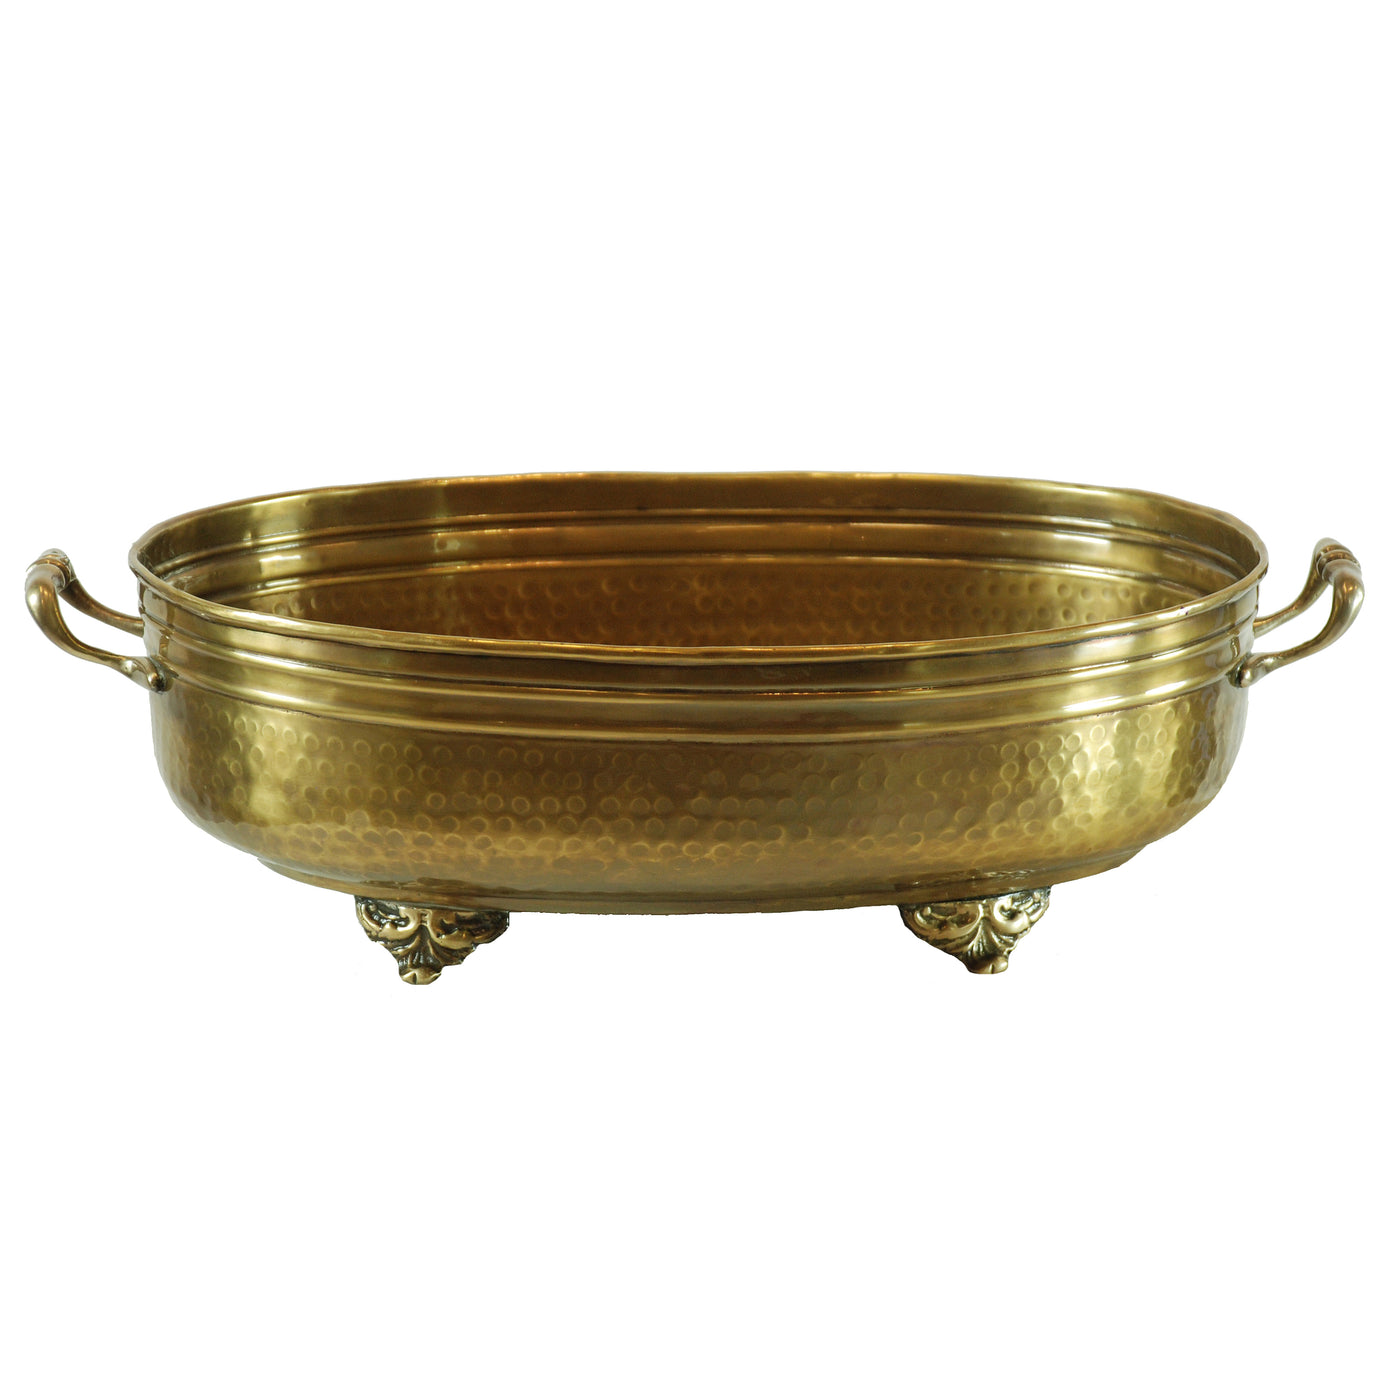 Oval brass metal planter with handle